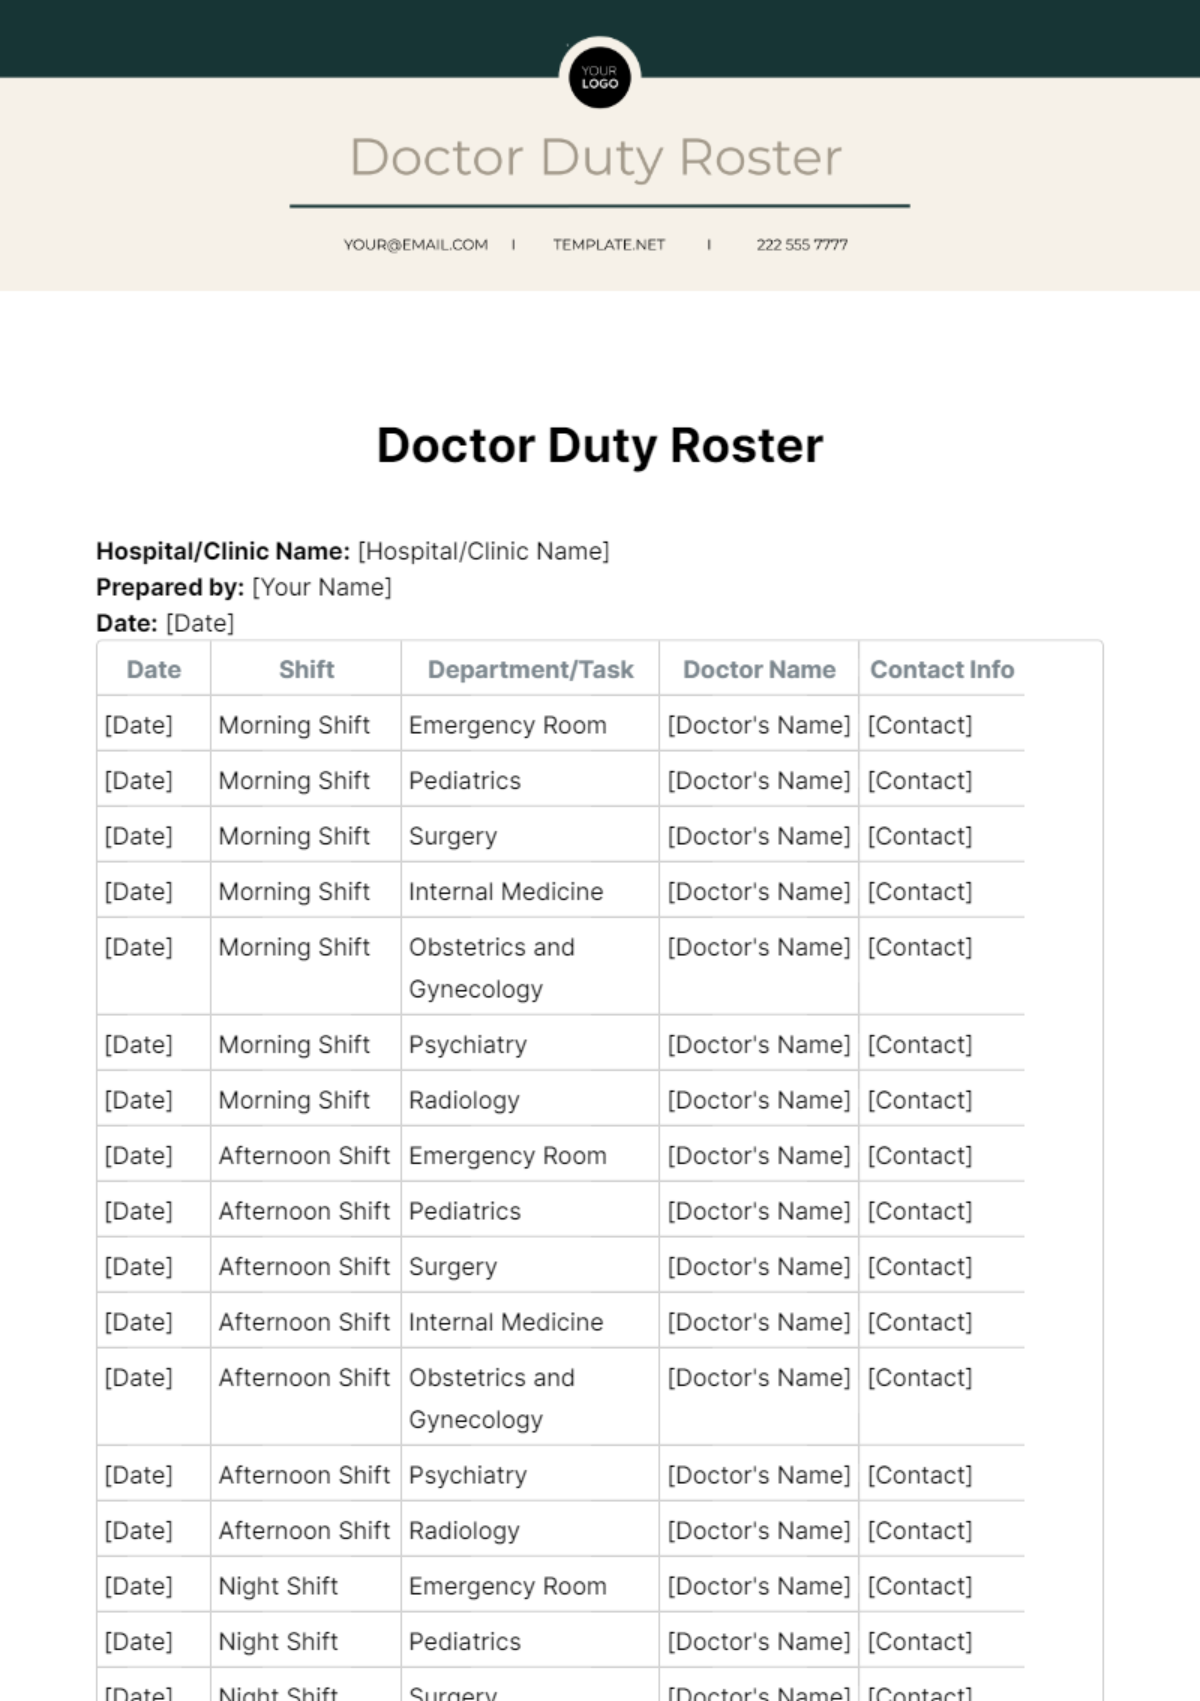 Doctor Duty Roster Template